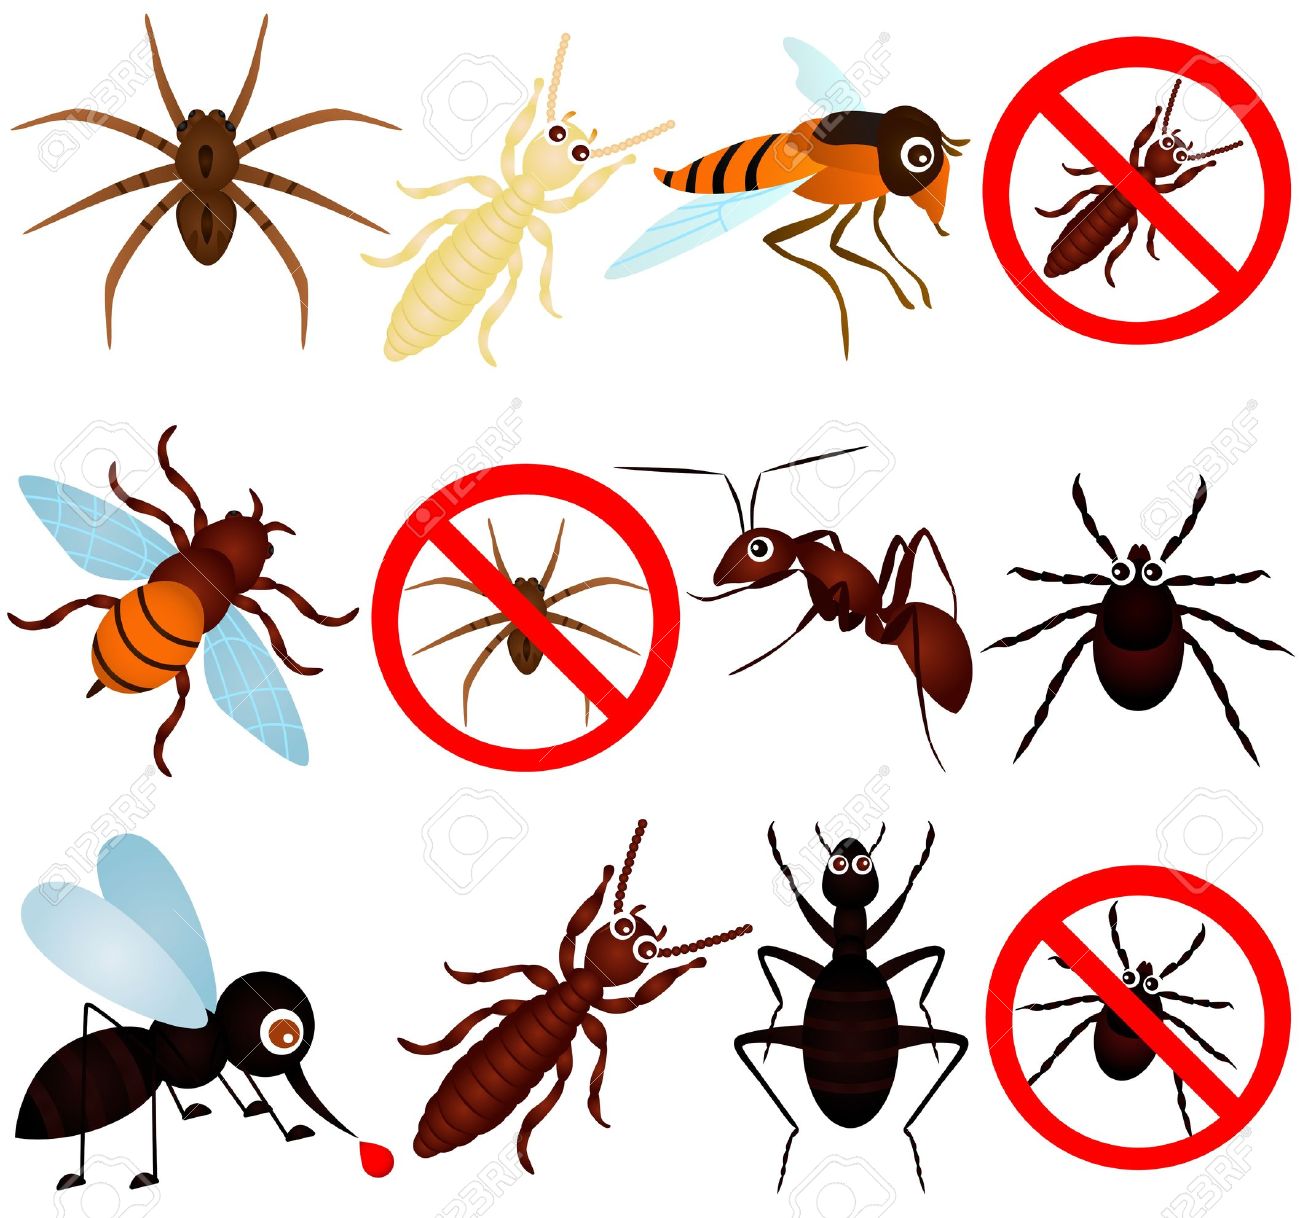 A Collection Of Bugs (mosquito, Termite, Ant, Etc) Royalty Free.